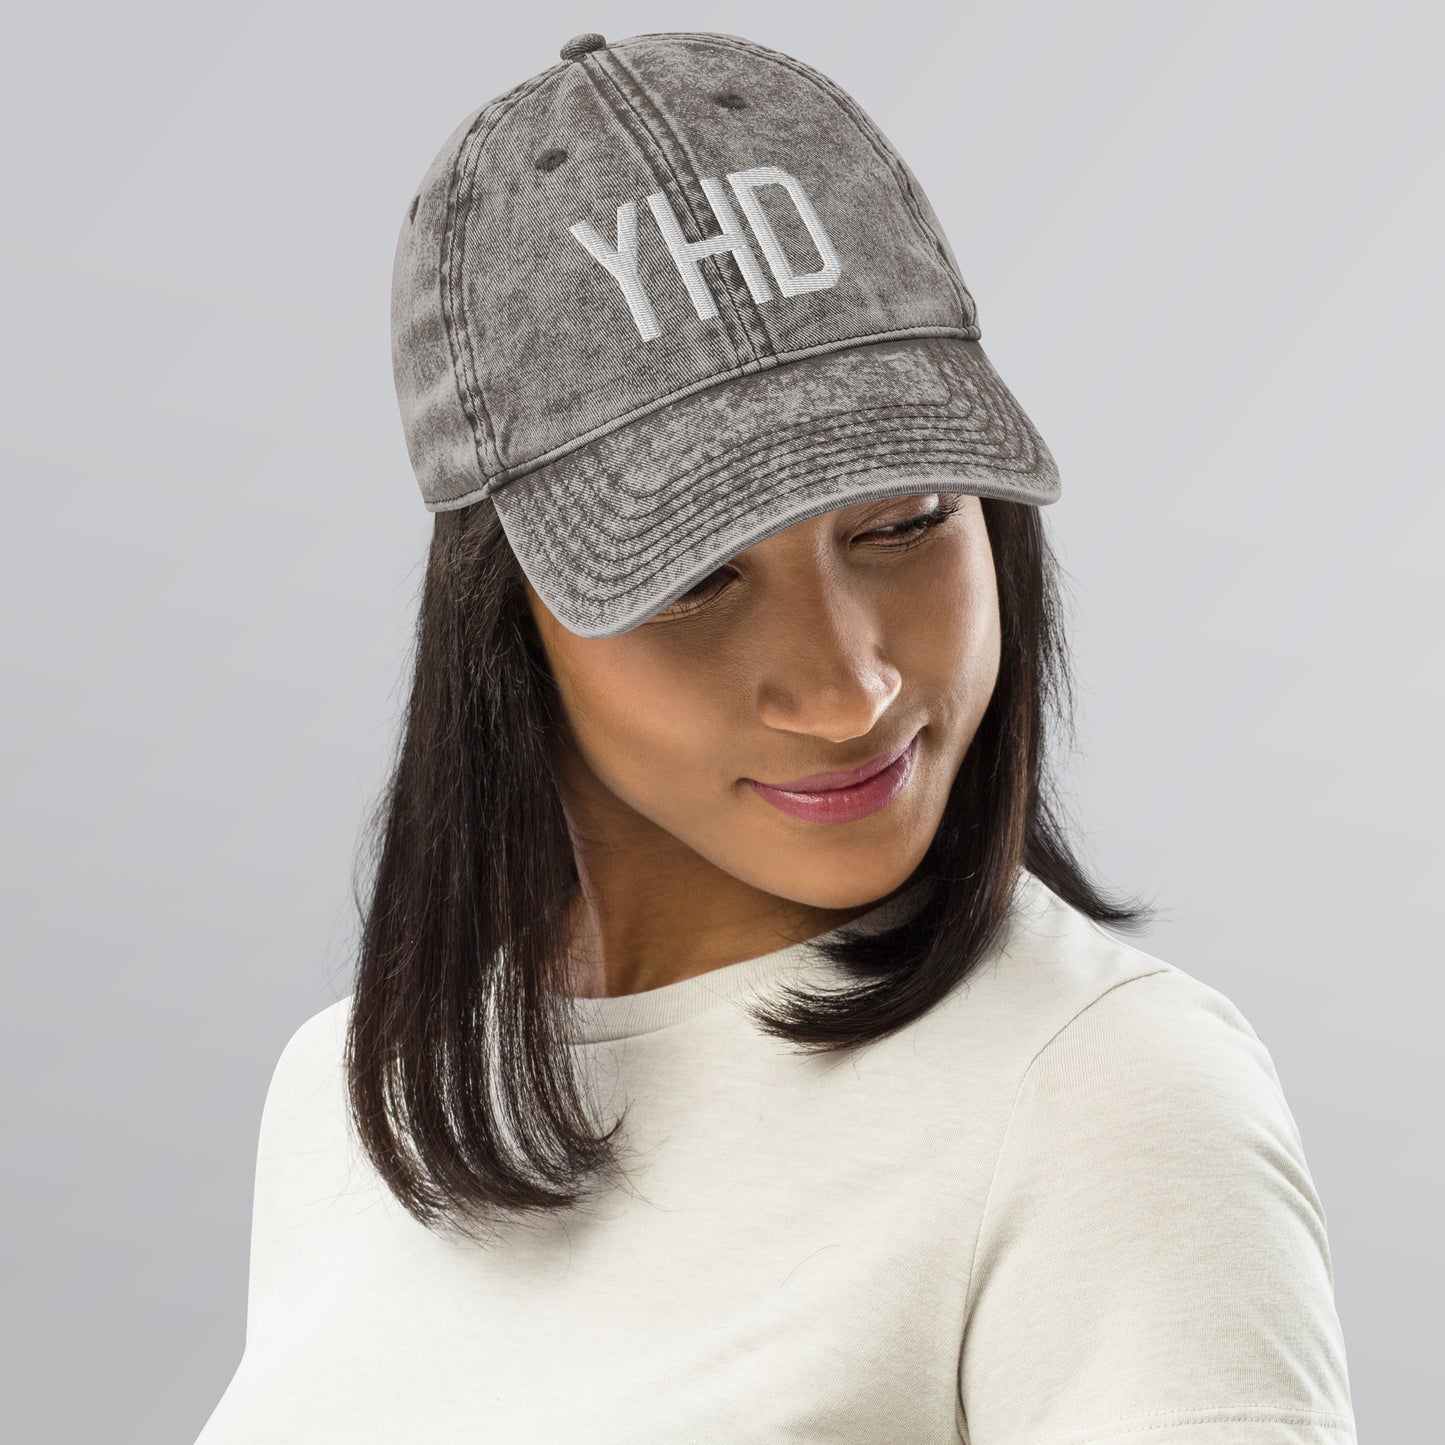 Airport Code Twill Cap - White • YHD Dryden • YHM Designs - Image 11